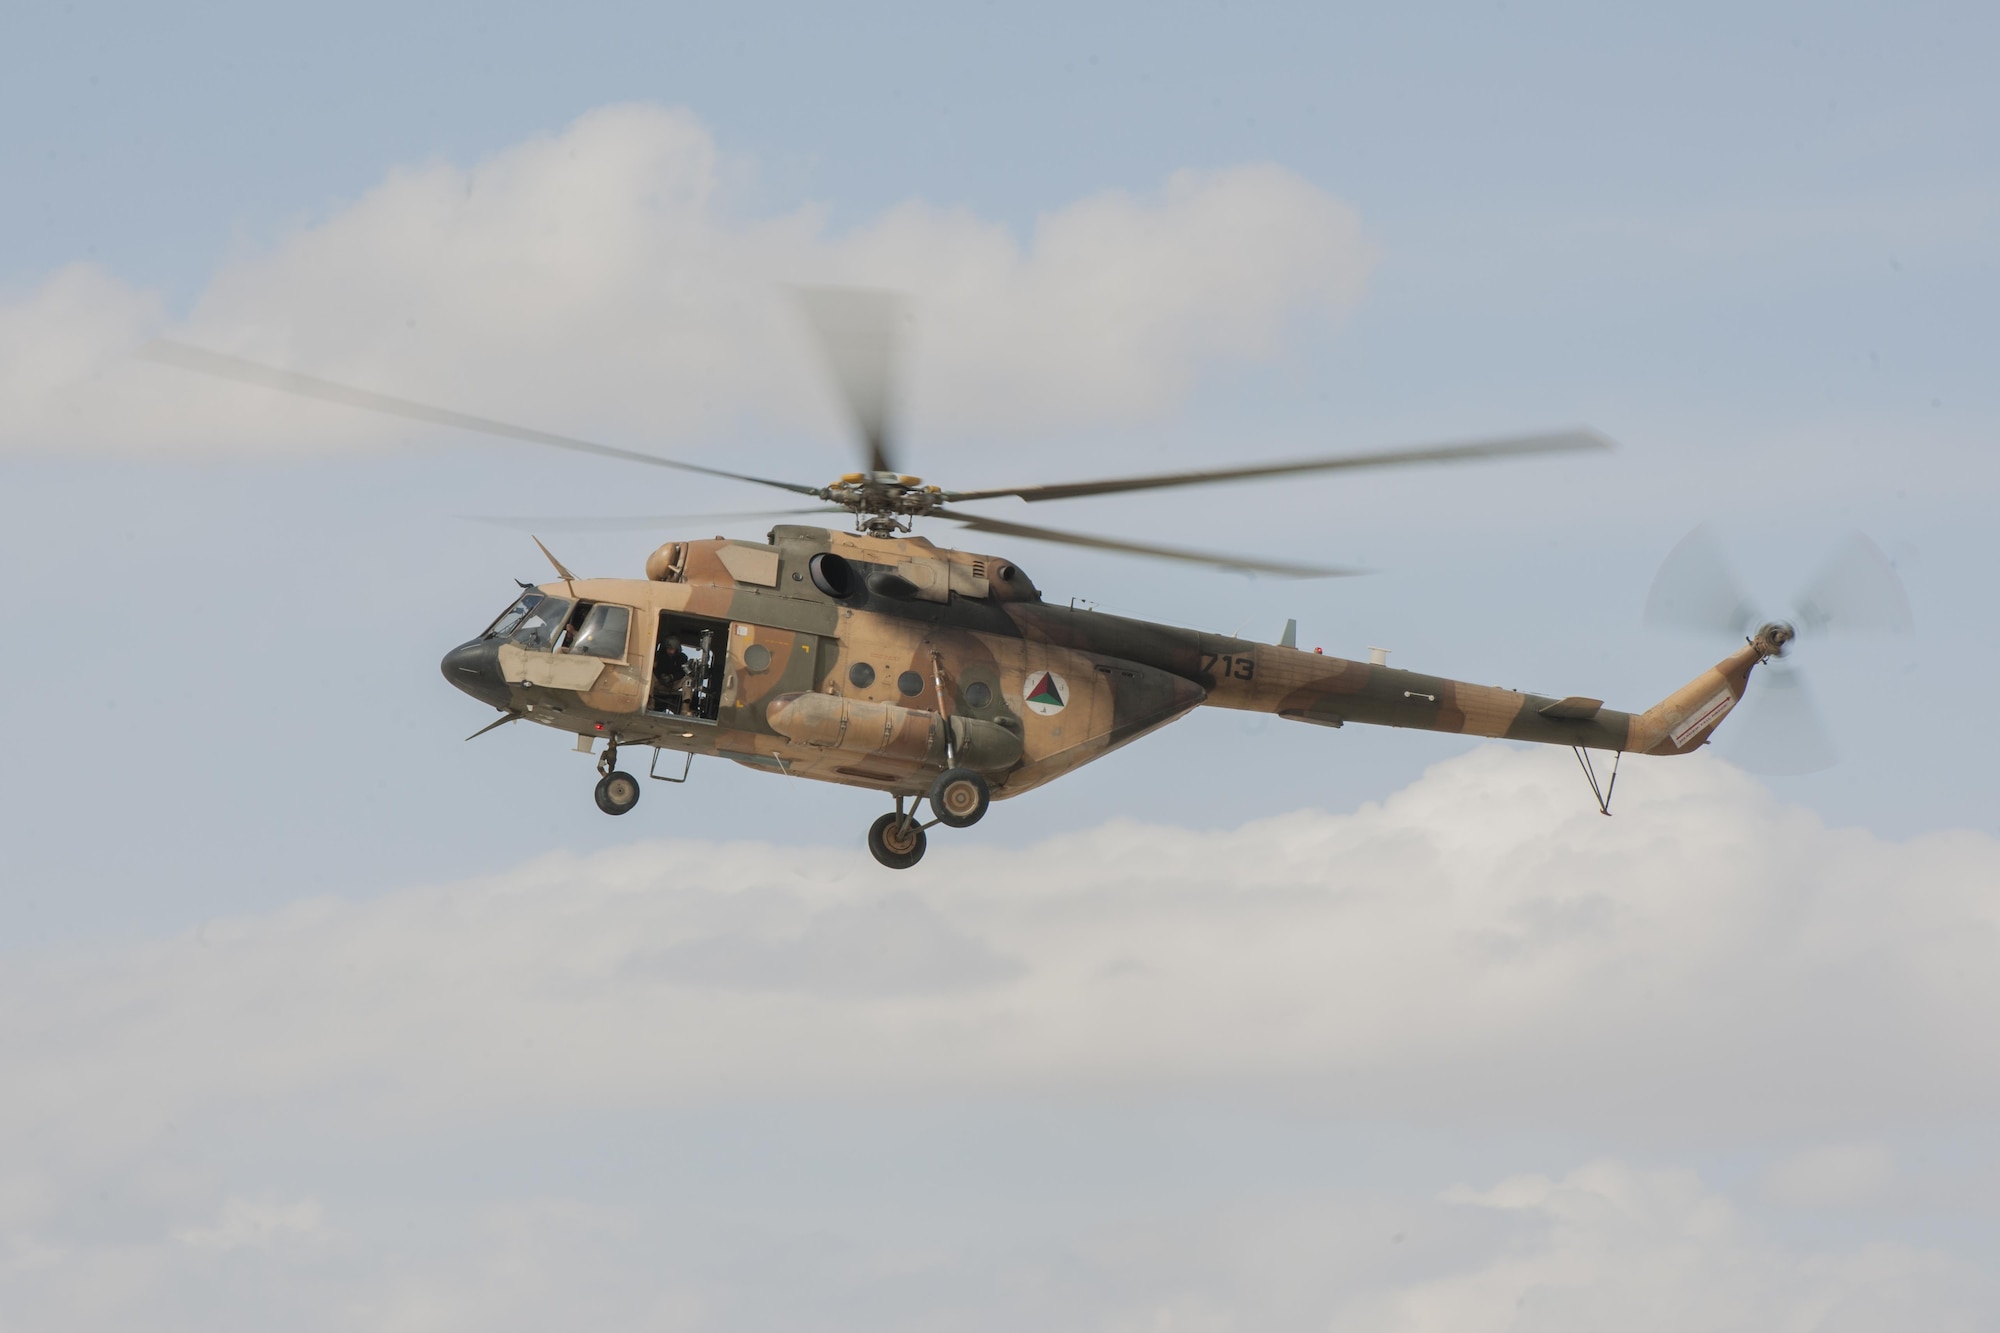 An Afghan Air Force Mi-17 flies over Kandahar Airfield, Afghanistan, March 2, 2016. Members of the AAF work closely with Train Advise Assist Command - Air, a U.S. run functional command, that assists our Afghan partners to develop a professional, capable and sustainable force. (U.S. Air Force photo/Tech. Sgt. Robert Cloys)